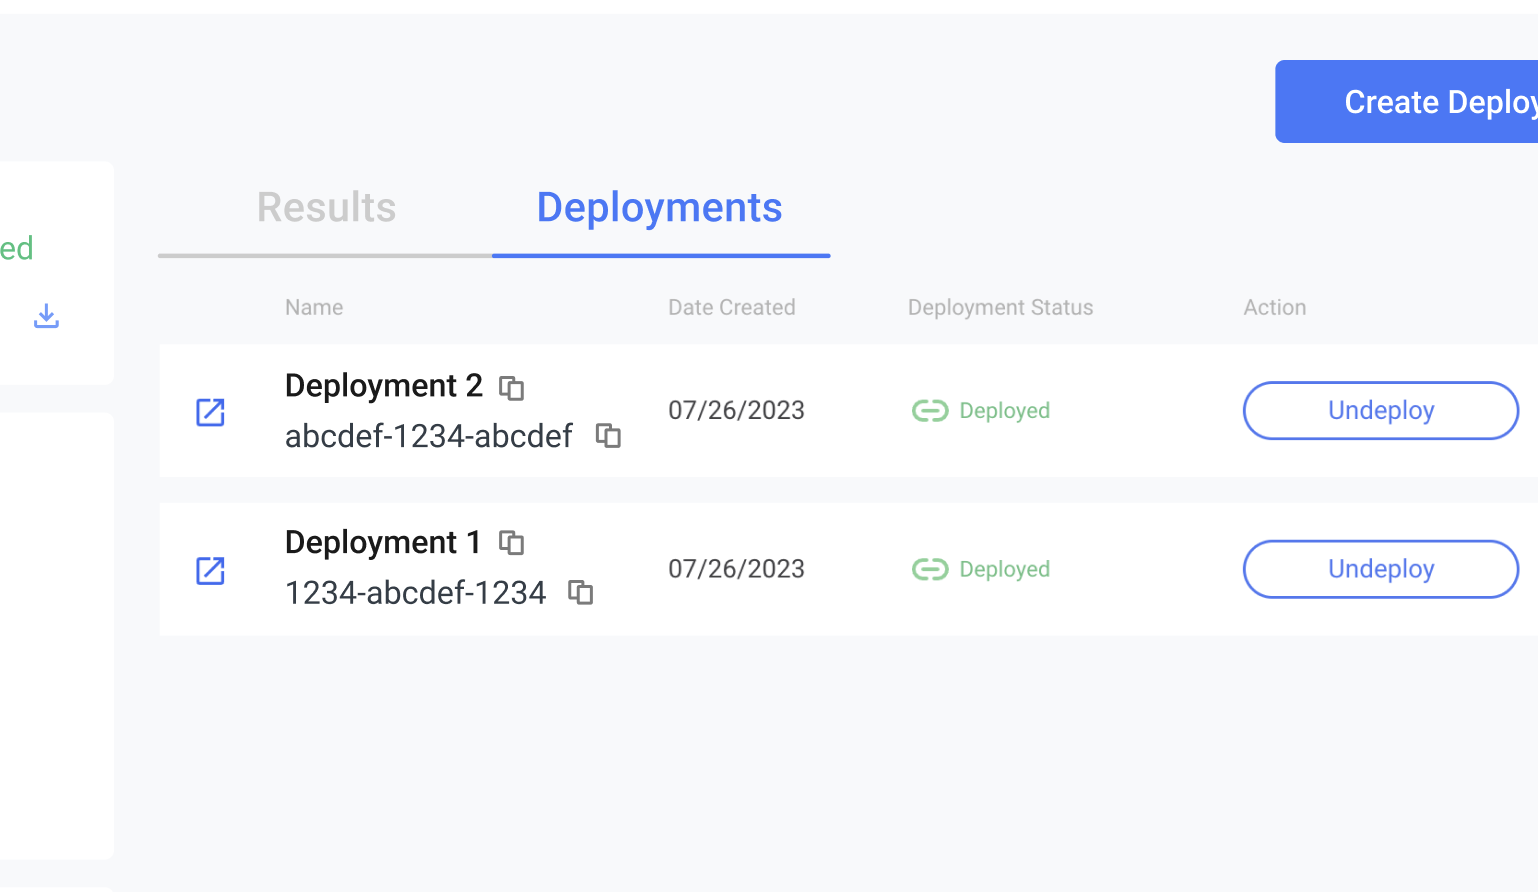 The "Deployments" tab, showing two different model deployments and their statuses.